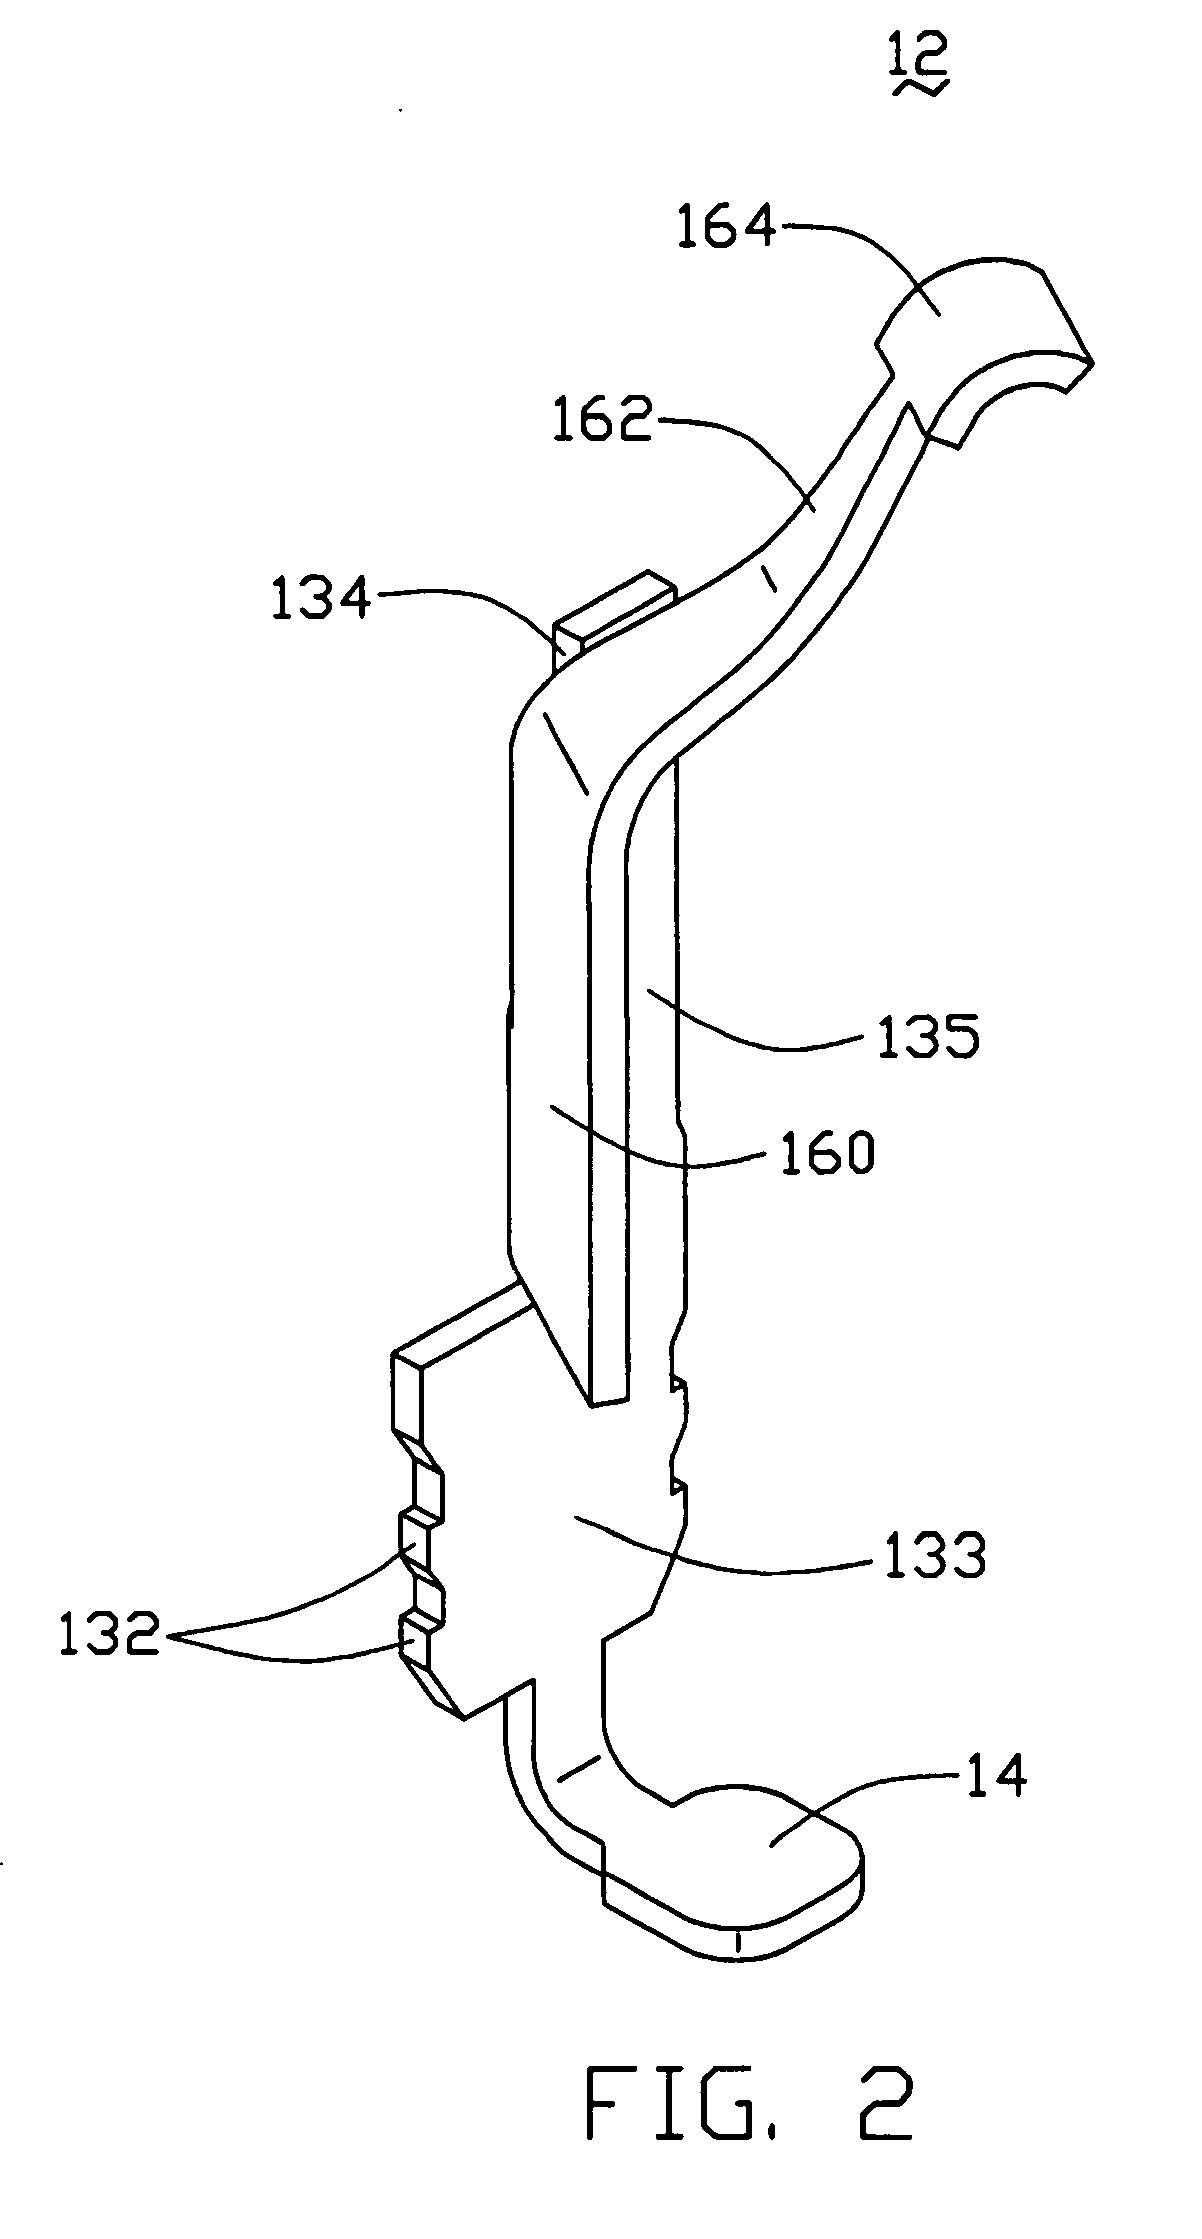 Electrical connector having electrical contacts with enlarged contact portions